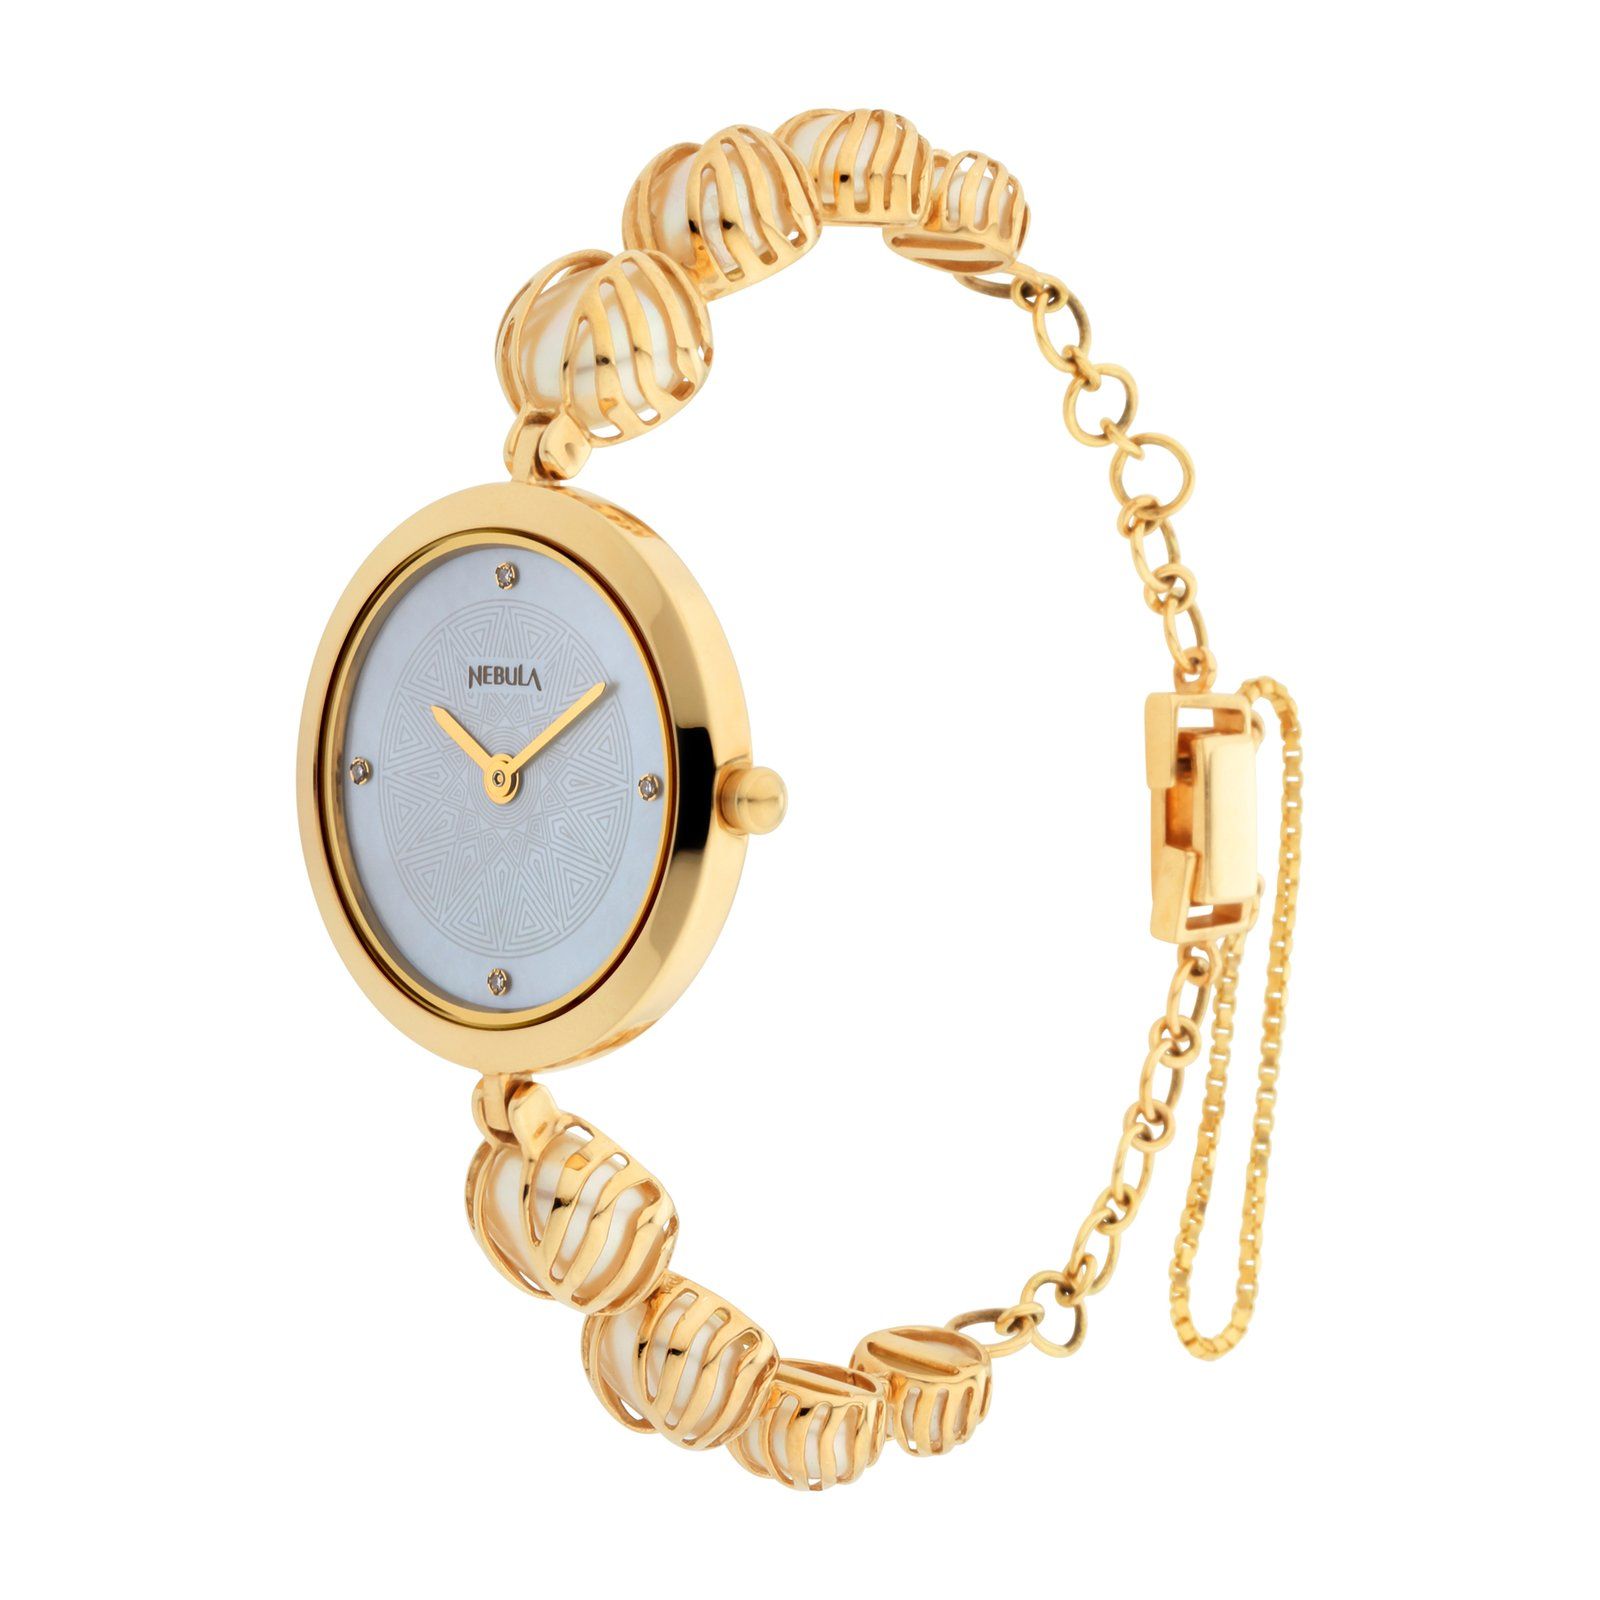 Cherish the artistic excellence of gold watches with the Atika timepiece by Nebula